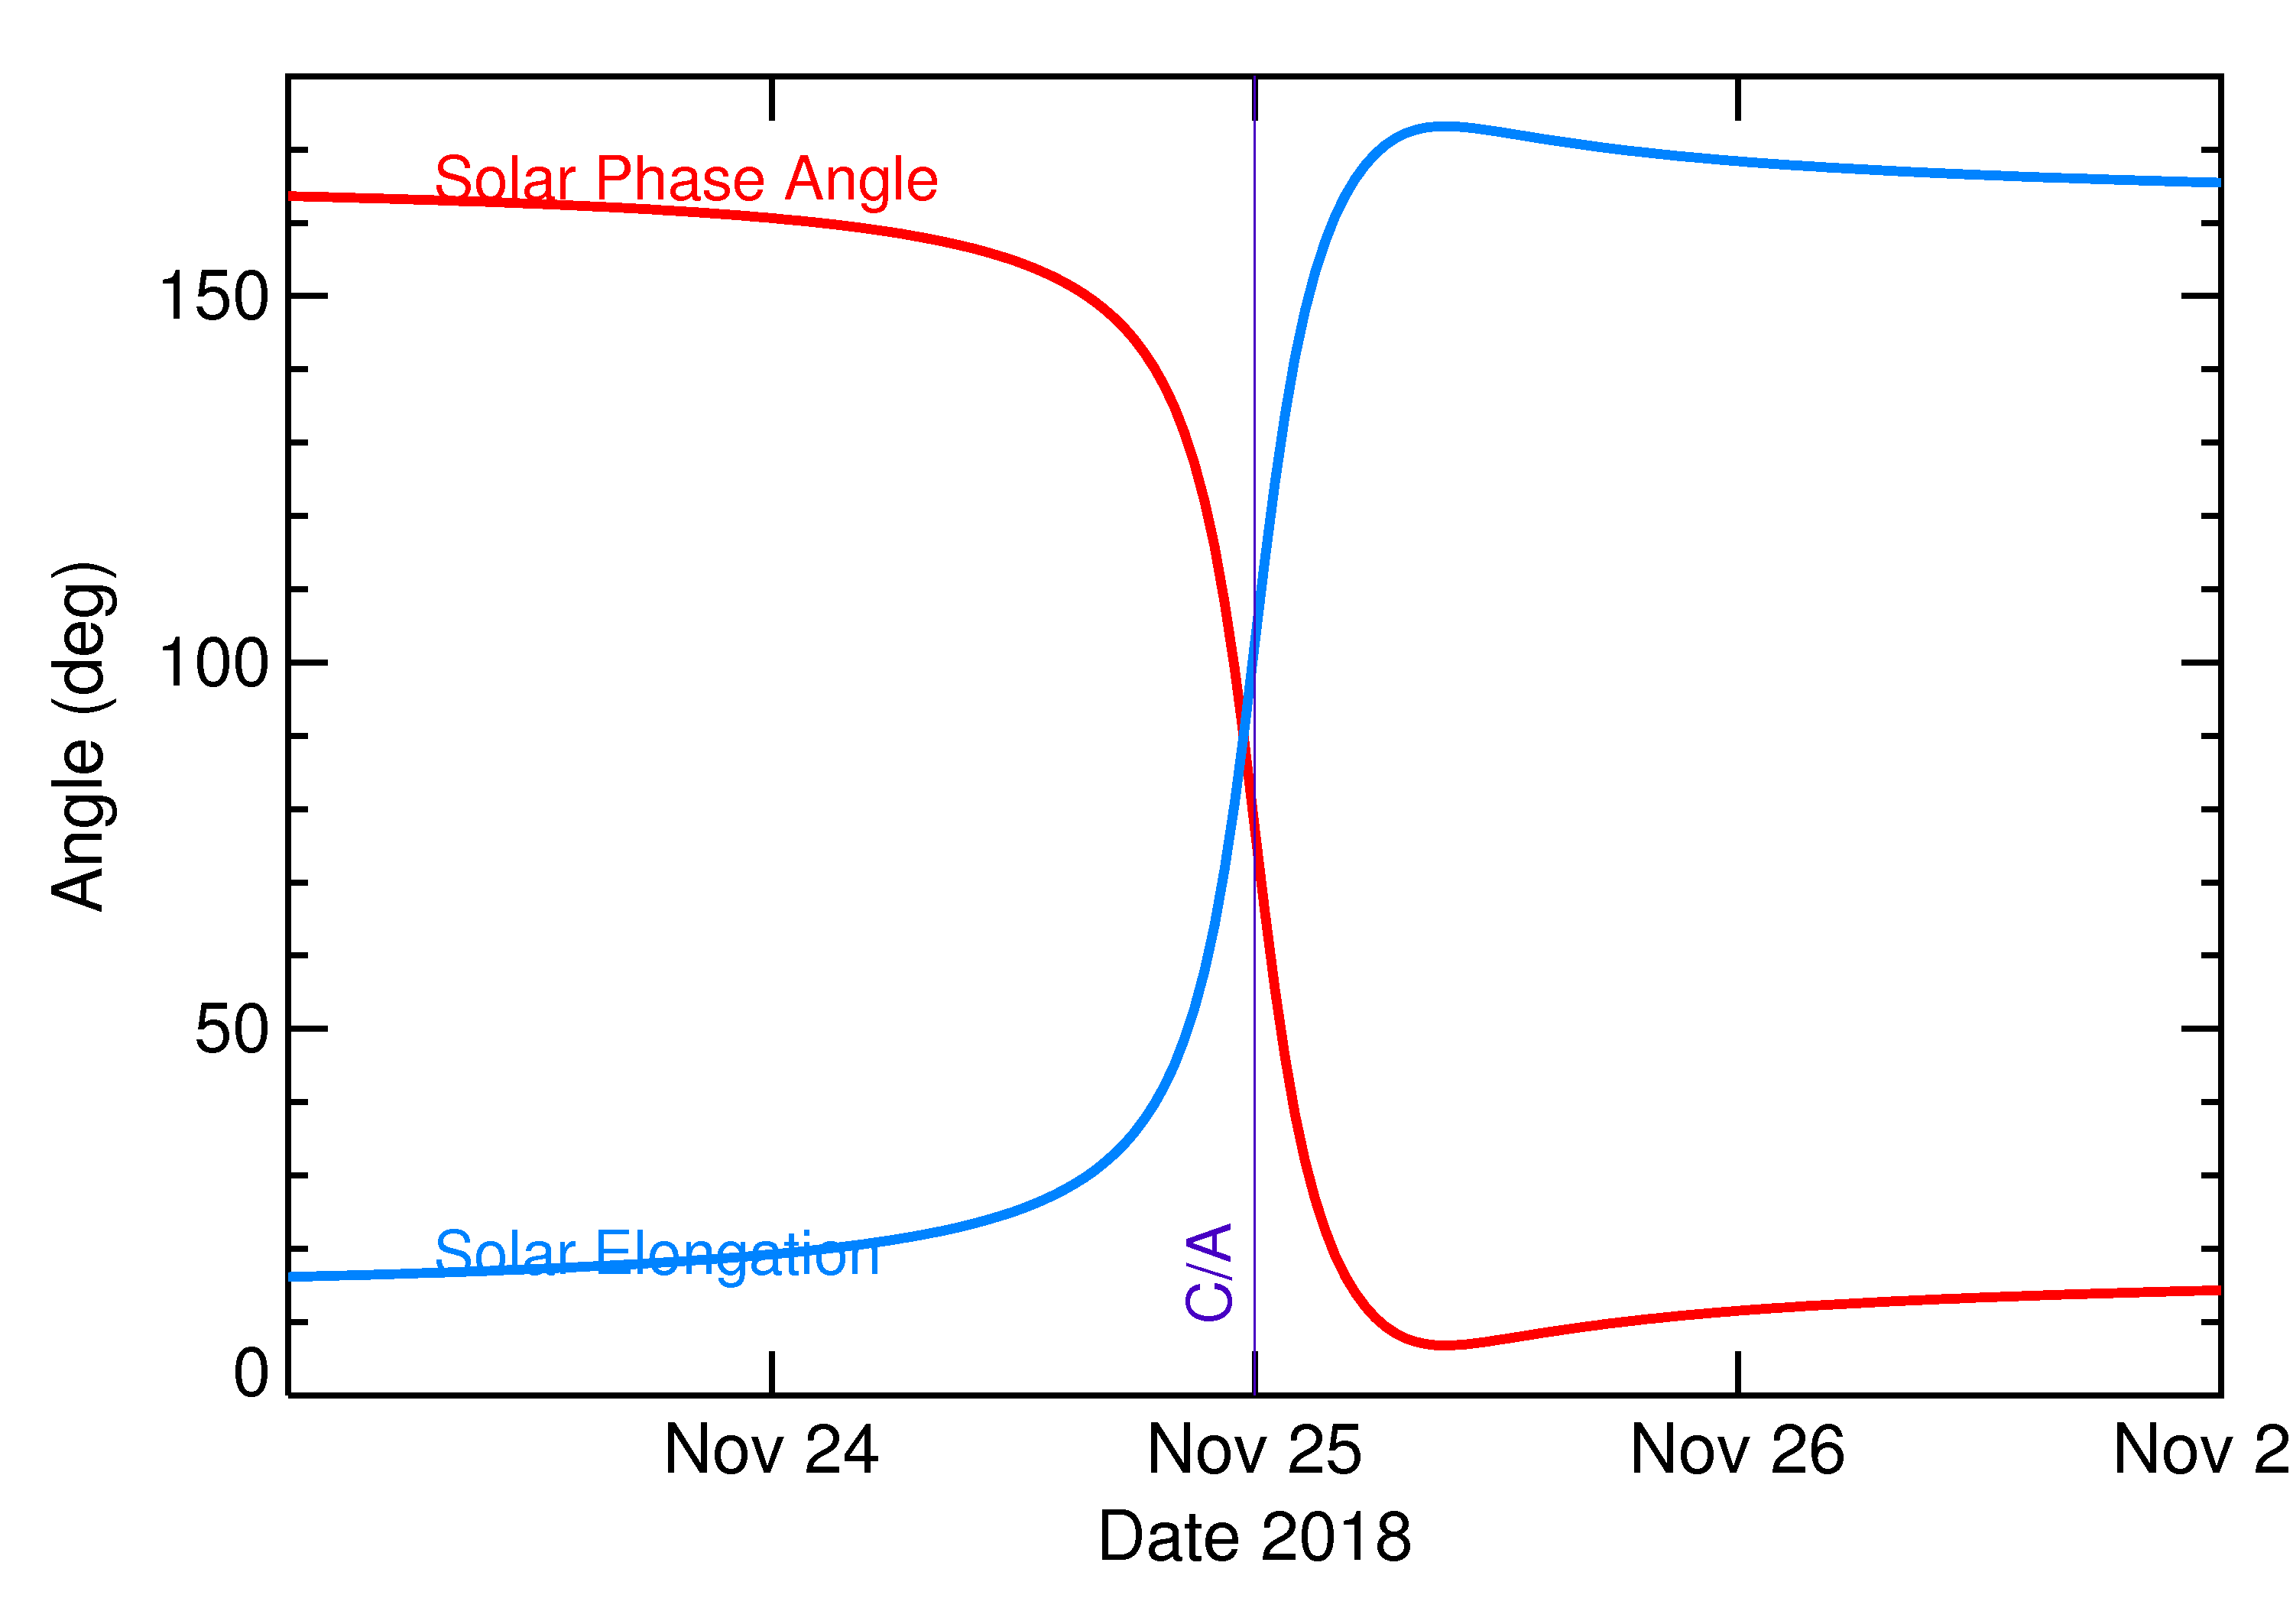 Solar Elongation and Solar Phase Angle of 2018 WE1 in the days around closest approach